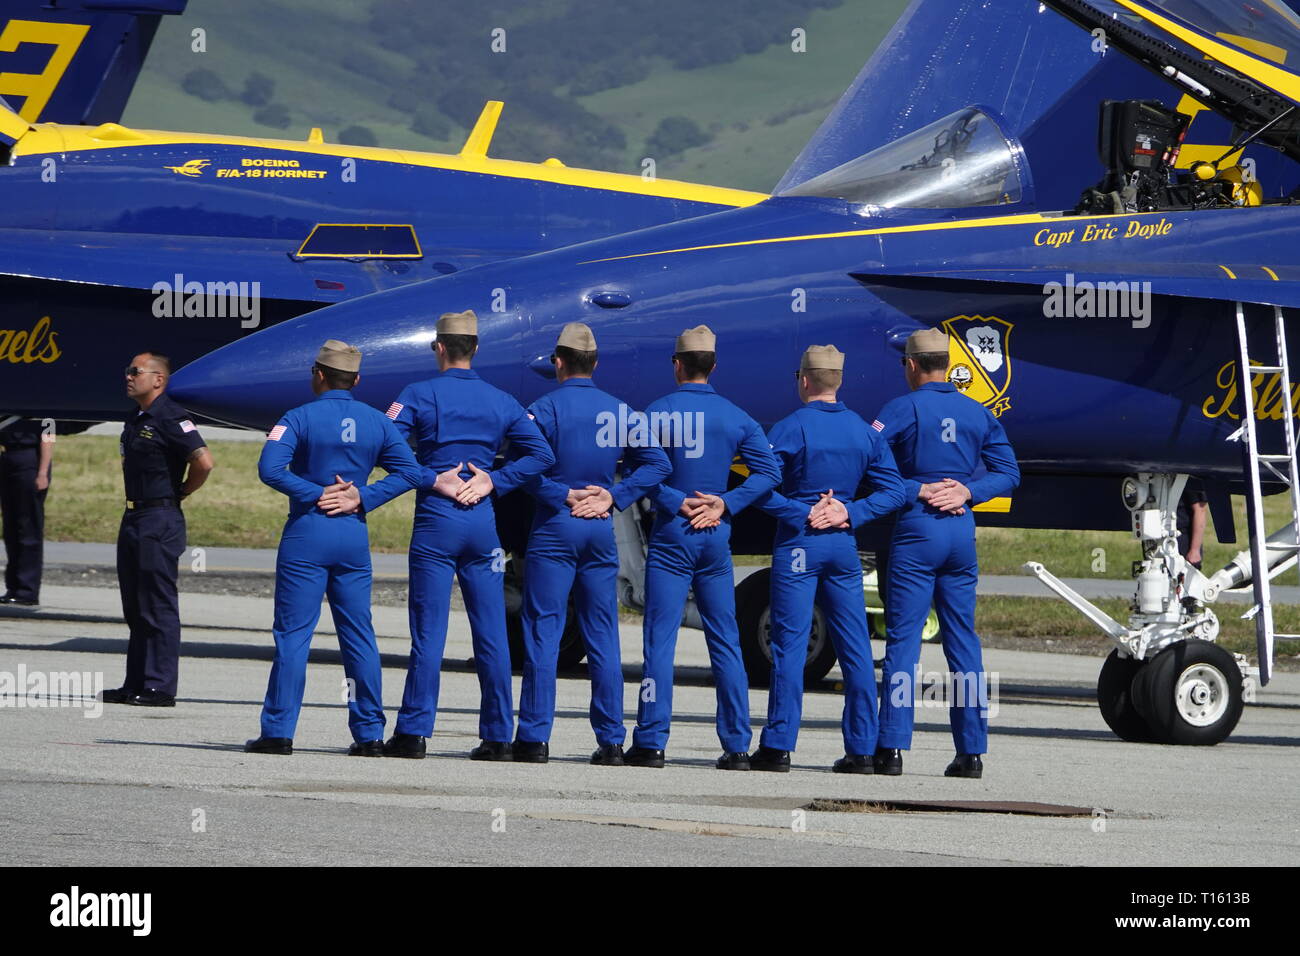 California, USA. 23rd Mar, 2019. 23rd March, 2019   Salinas, California, USA        Scenes from the annual  Salinas Air-Show, featuring the US Navy 'Blue Angels' arobatic team here seen preparing, parading and performing spectacularly over the airfield. Credit: Motofoto/Alamy Live News Stock Photo